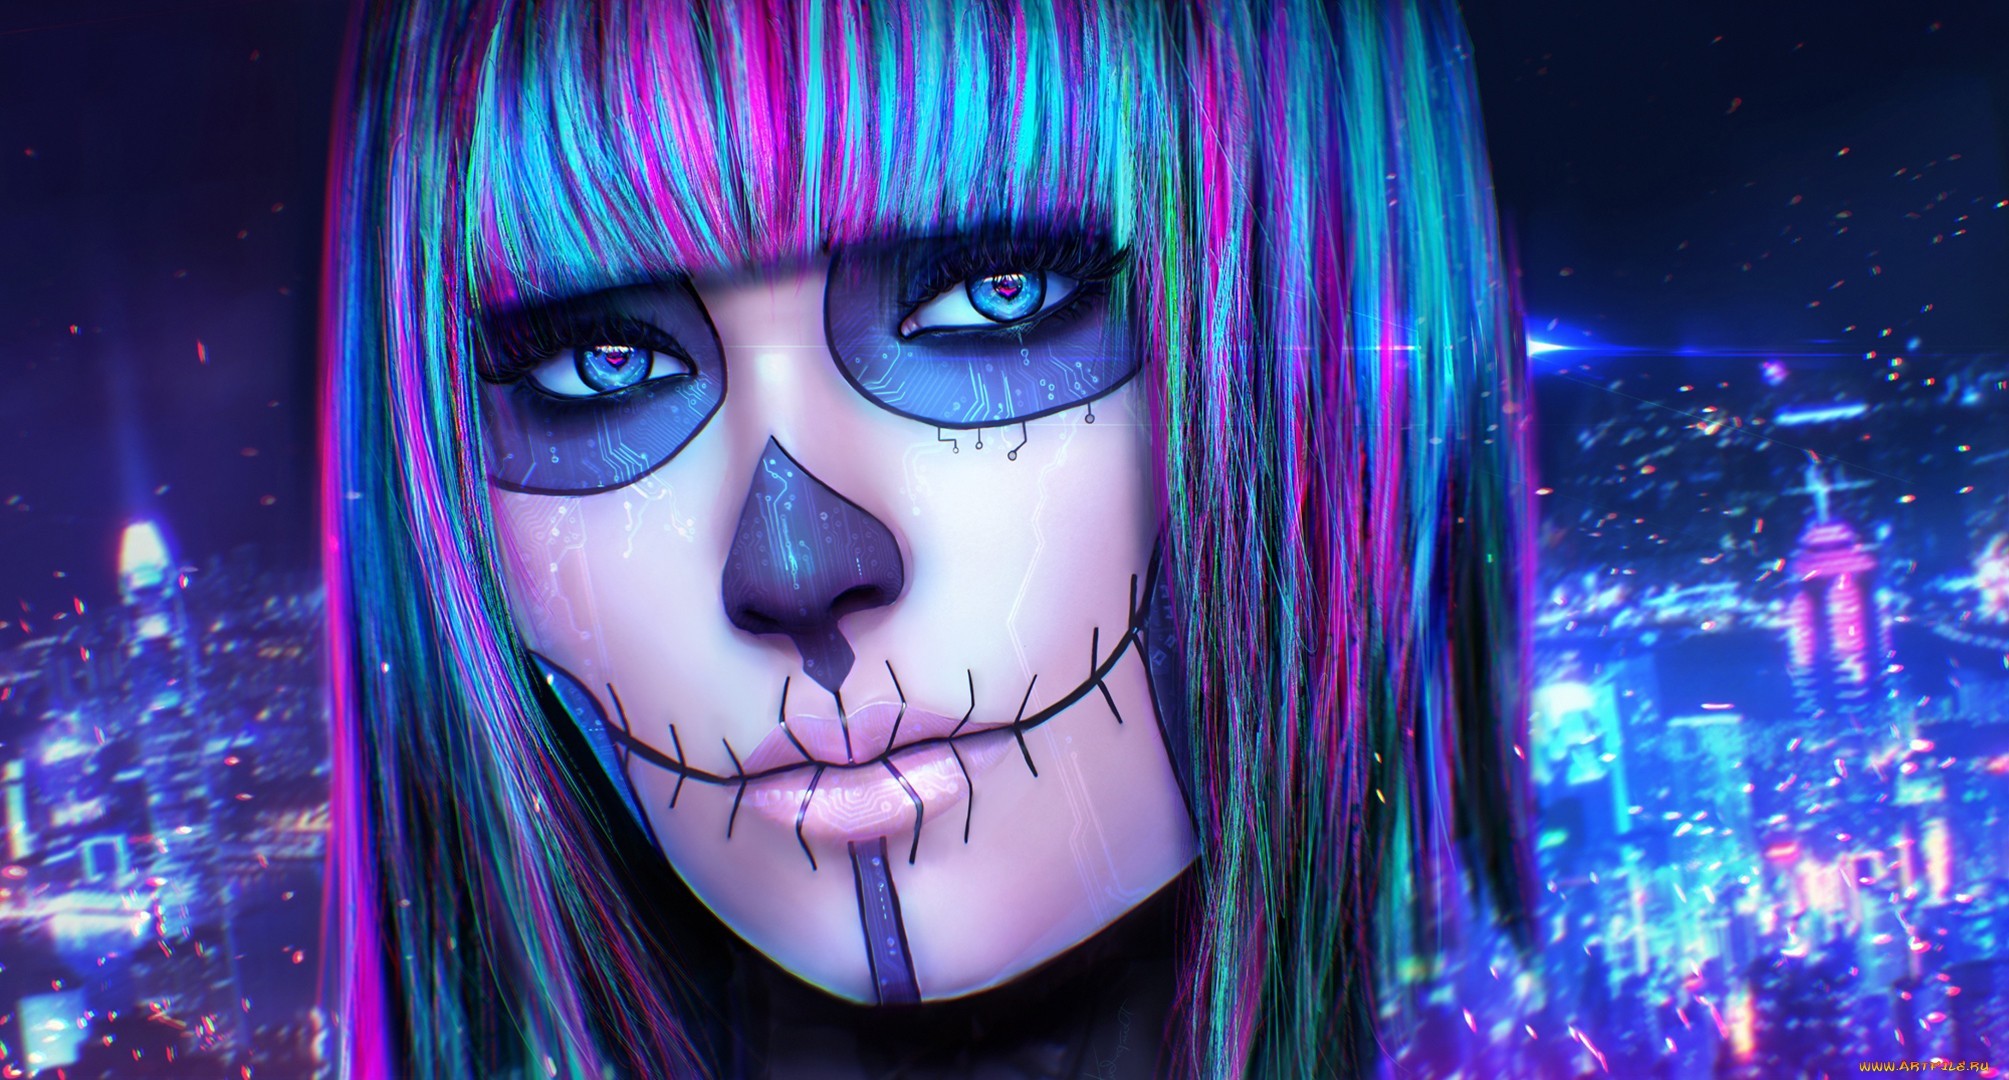 2009x1080 Artistic - Sugar Skull Woman Girl Day of the Dead Makeup Hair Colorful  Wallpaper